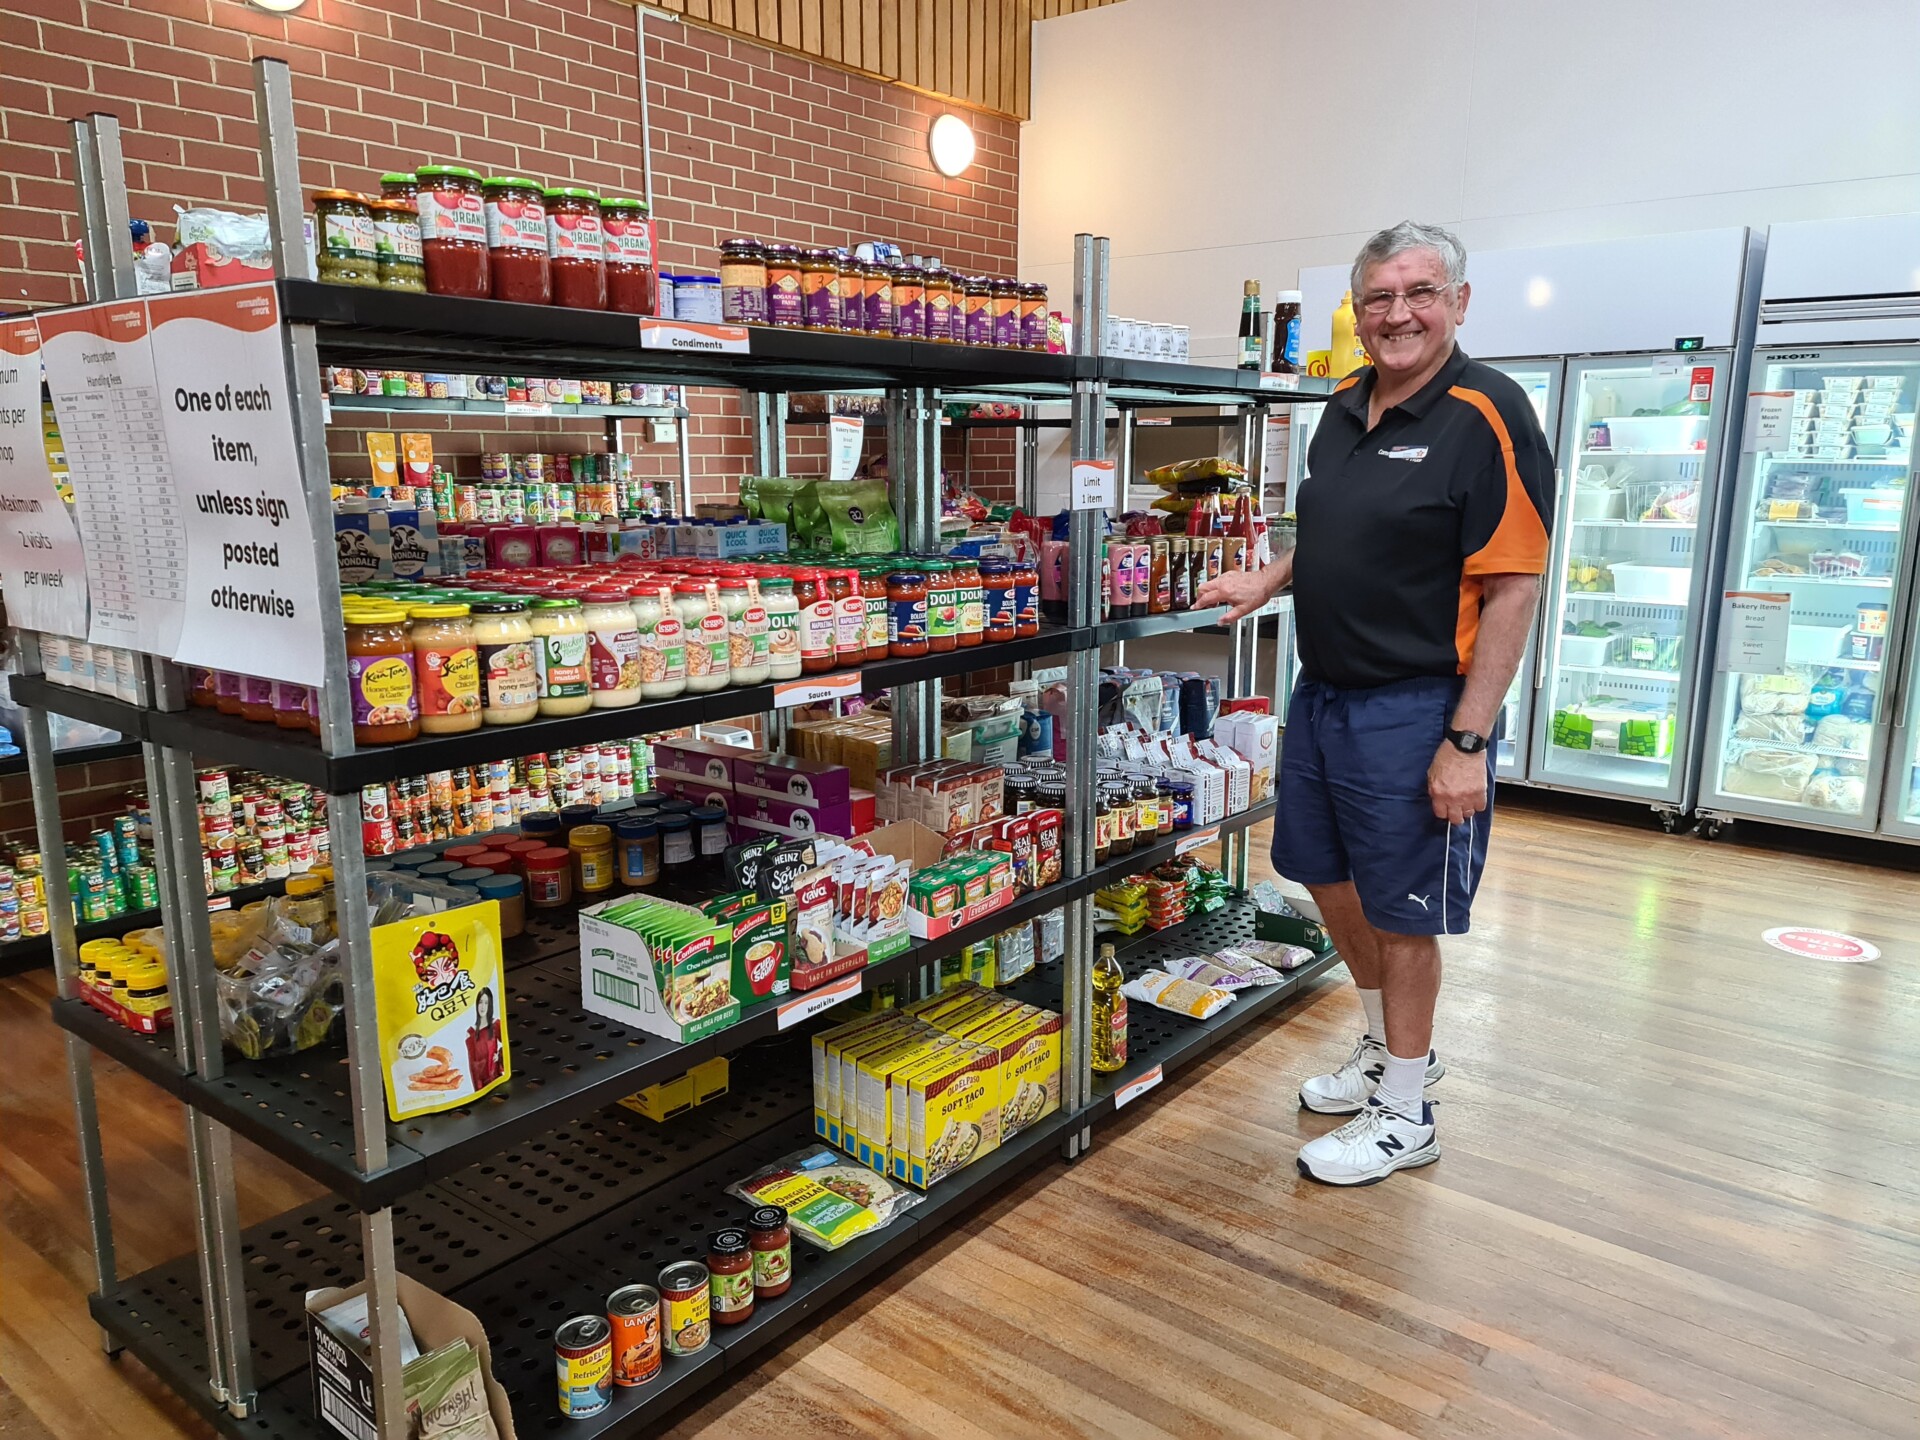 Graeme at the Community Pantry in Tuggeranong